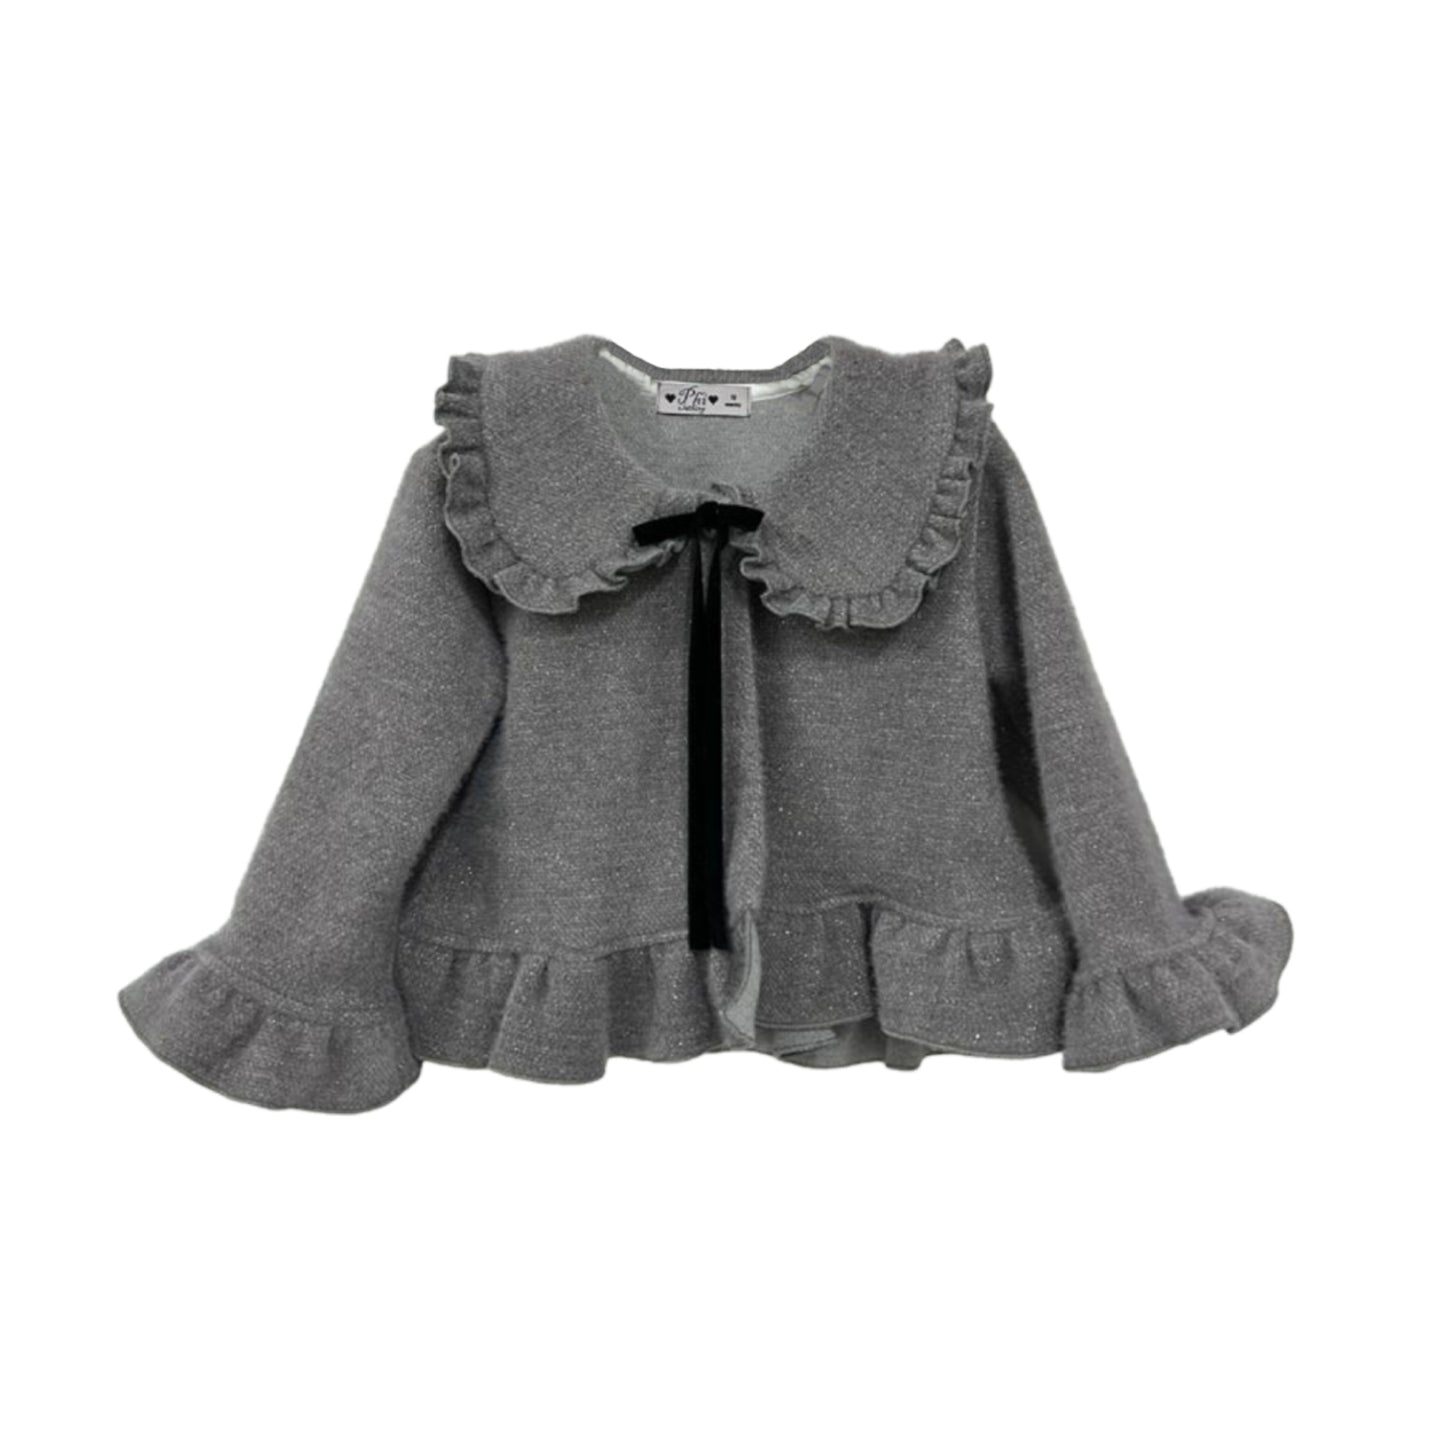 Grey Ruffled Top with Black Bow